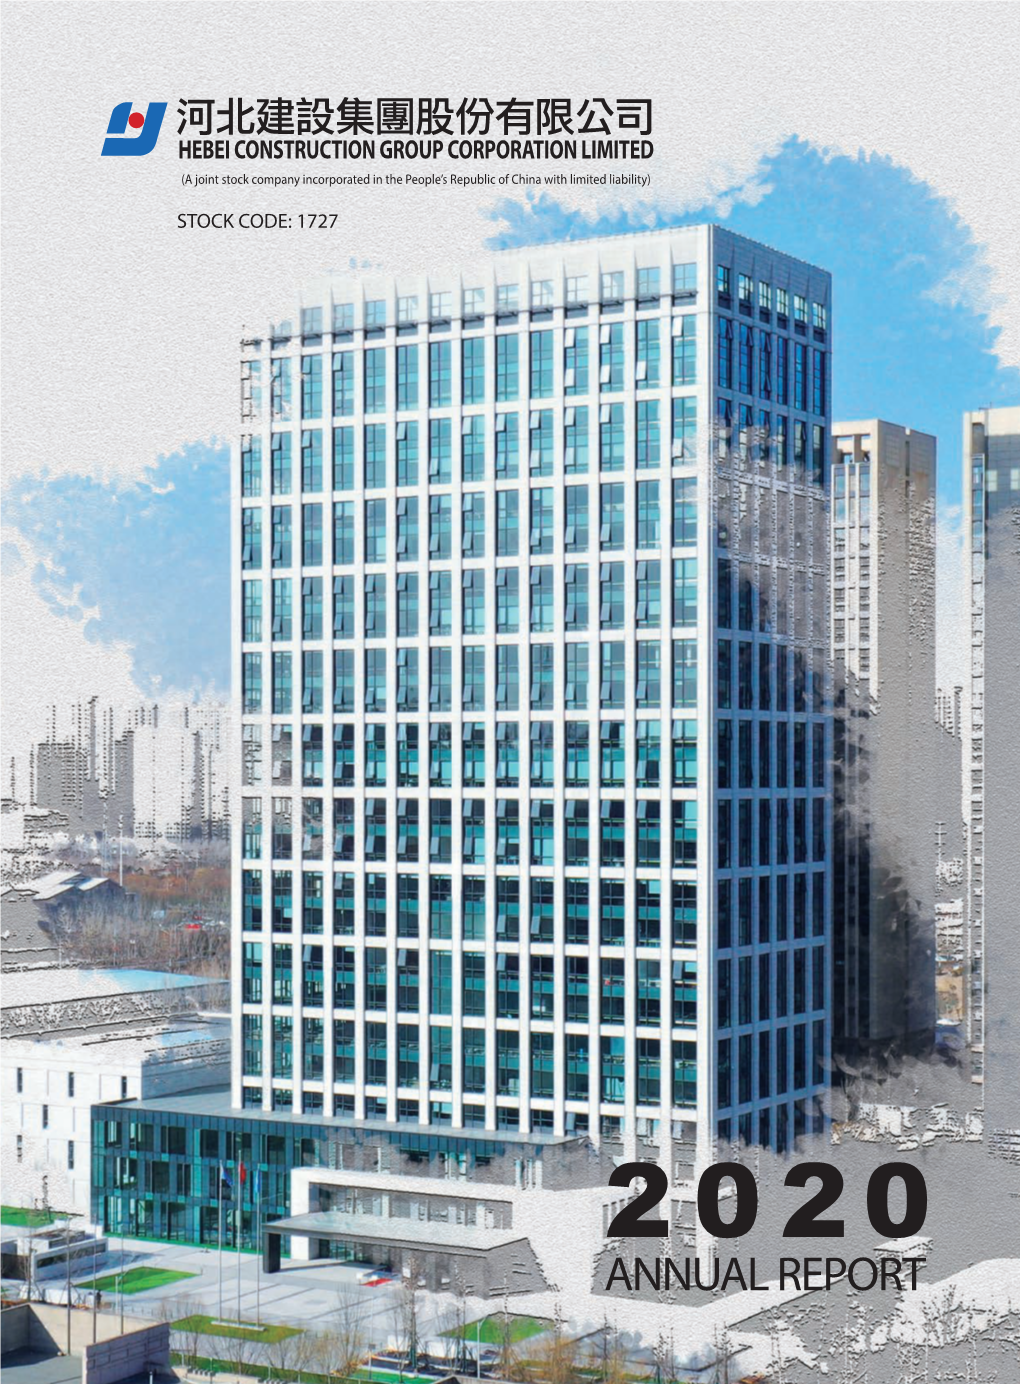 Annual Report 2020 3 CORPORATE INFORMATION